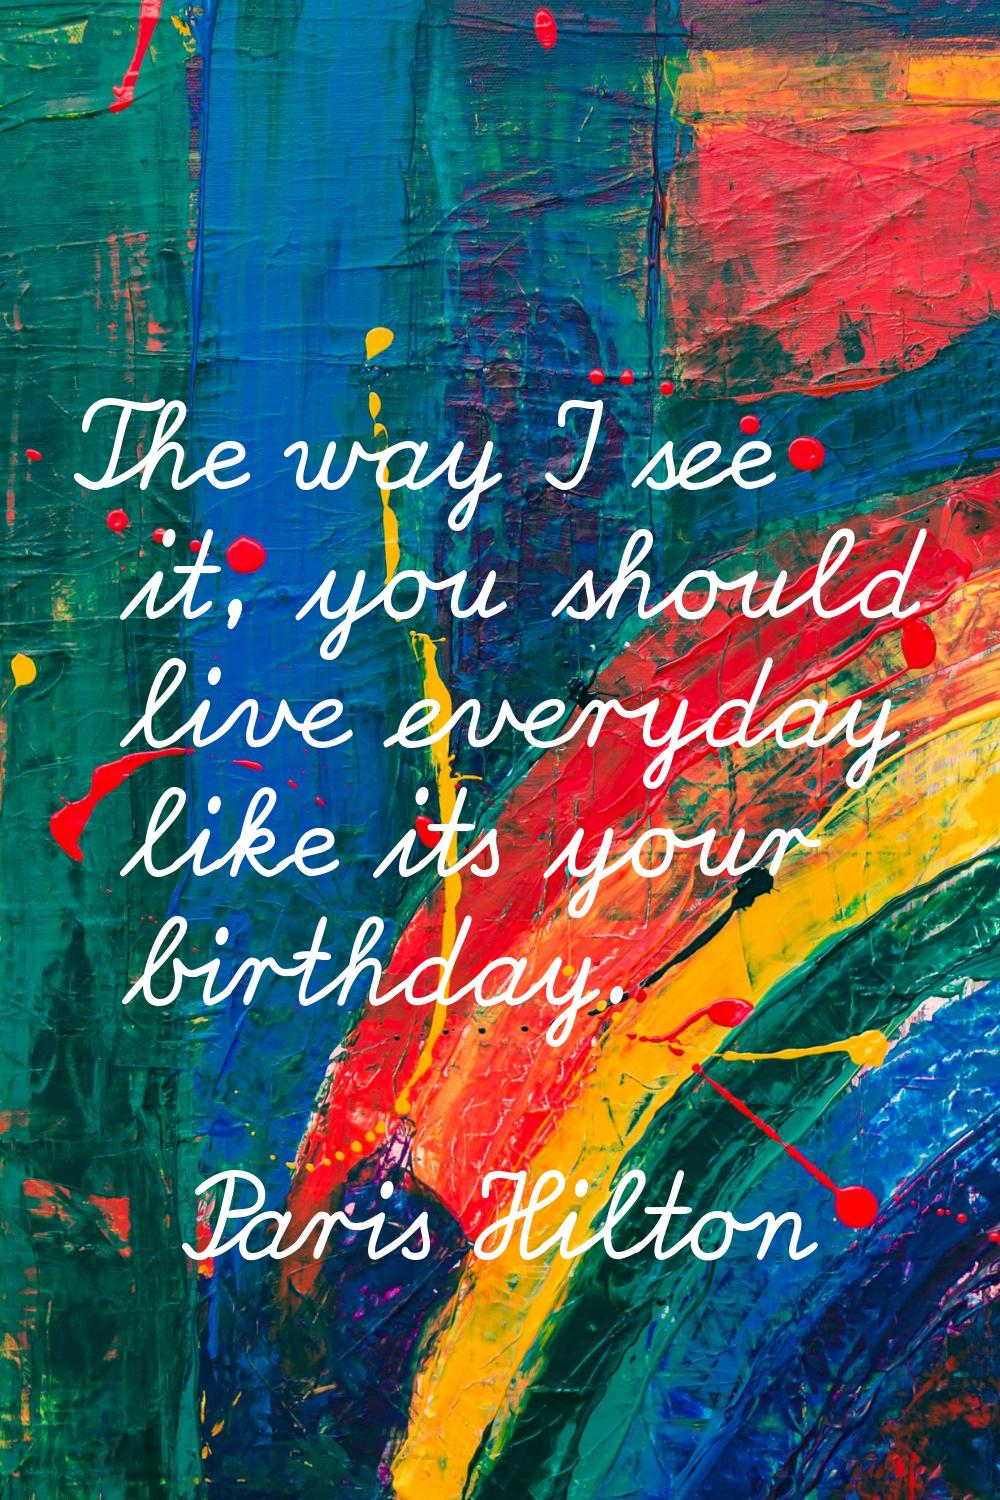 The way I see it, you should live everyday like its your birthday.